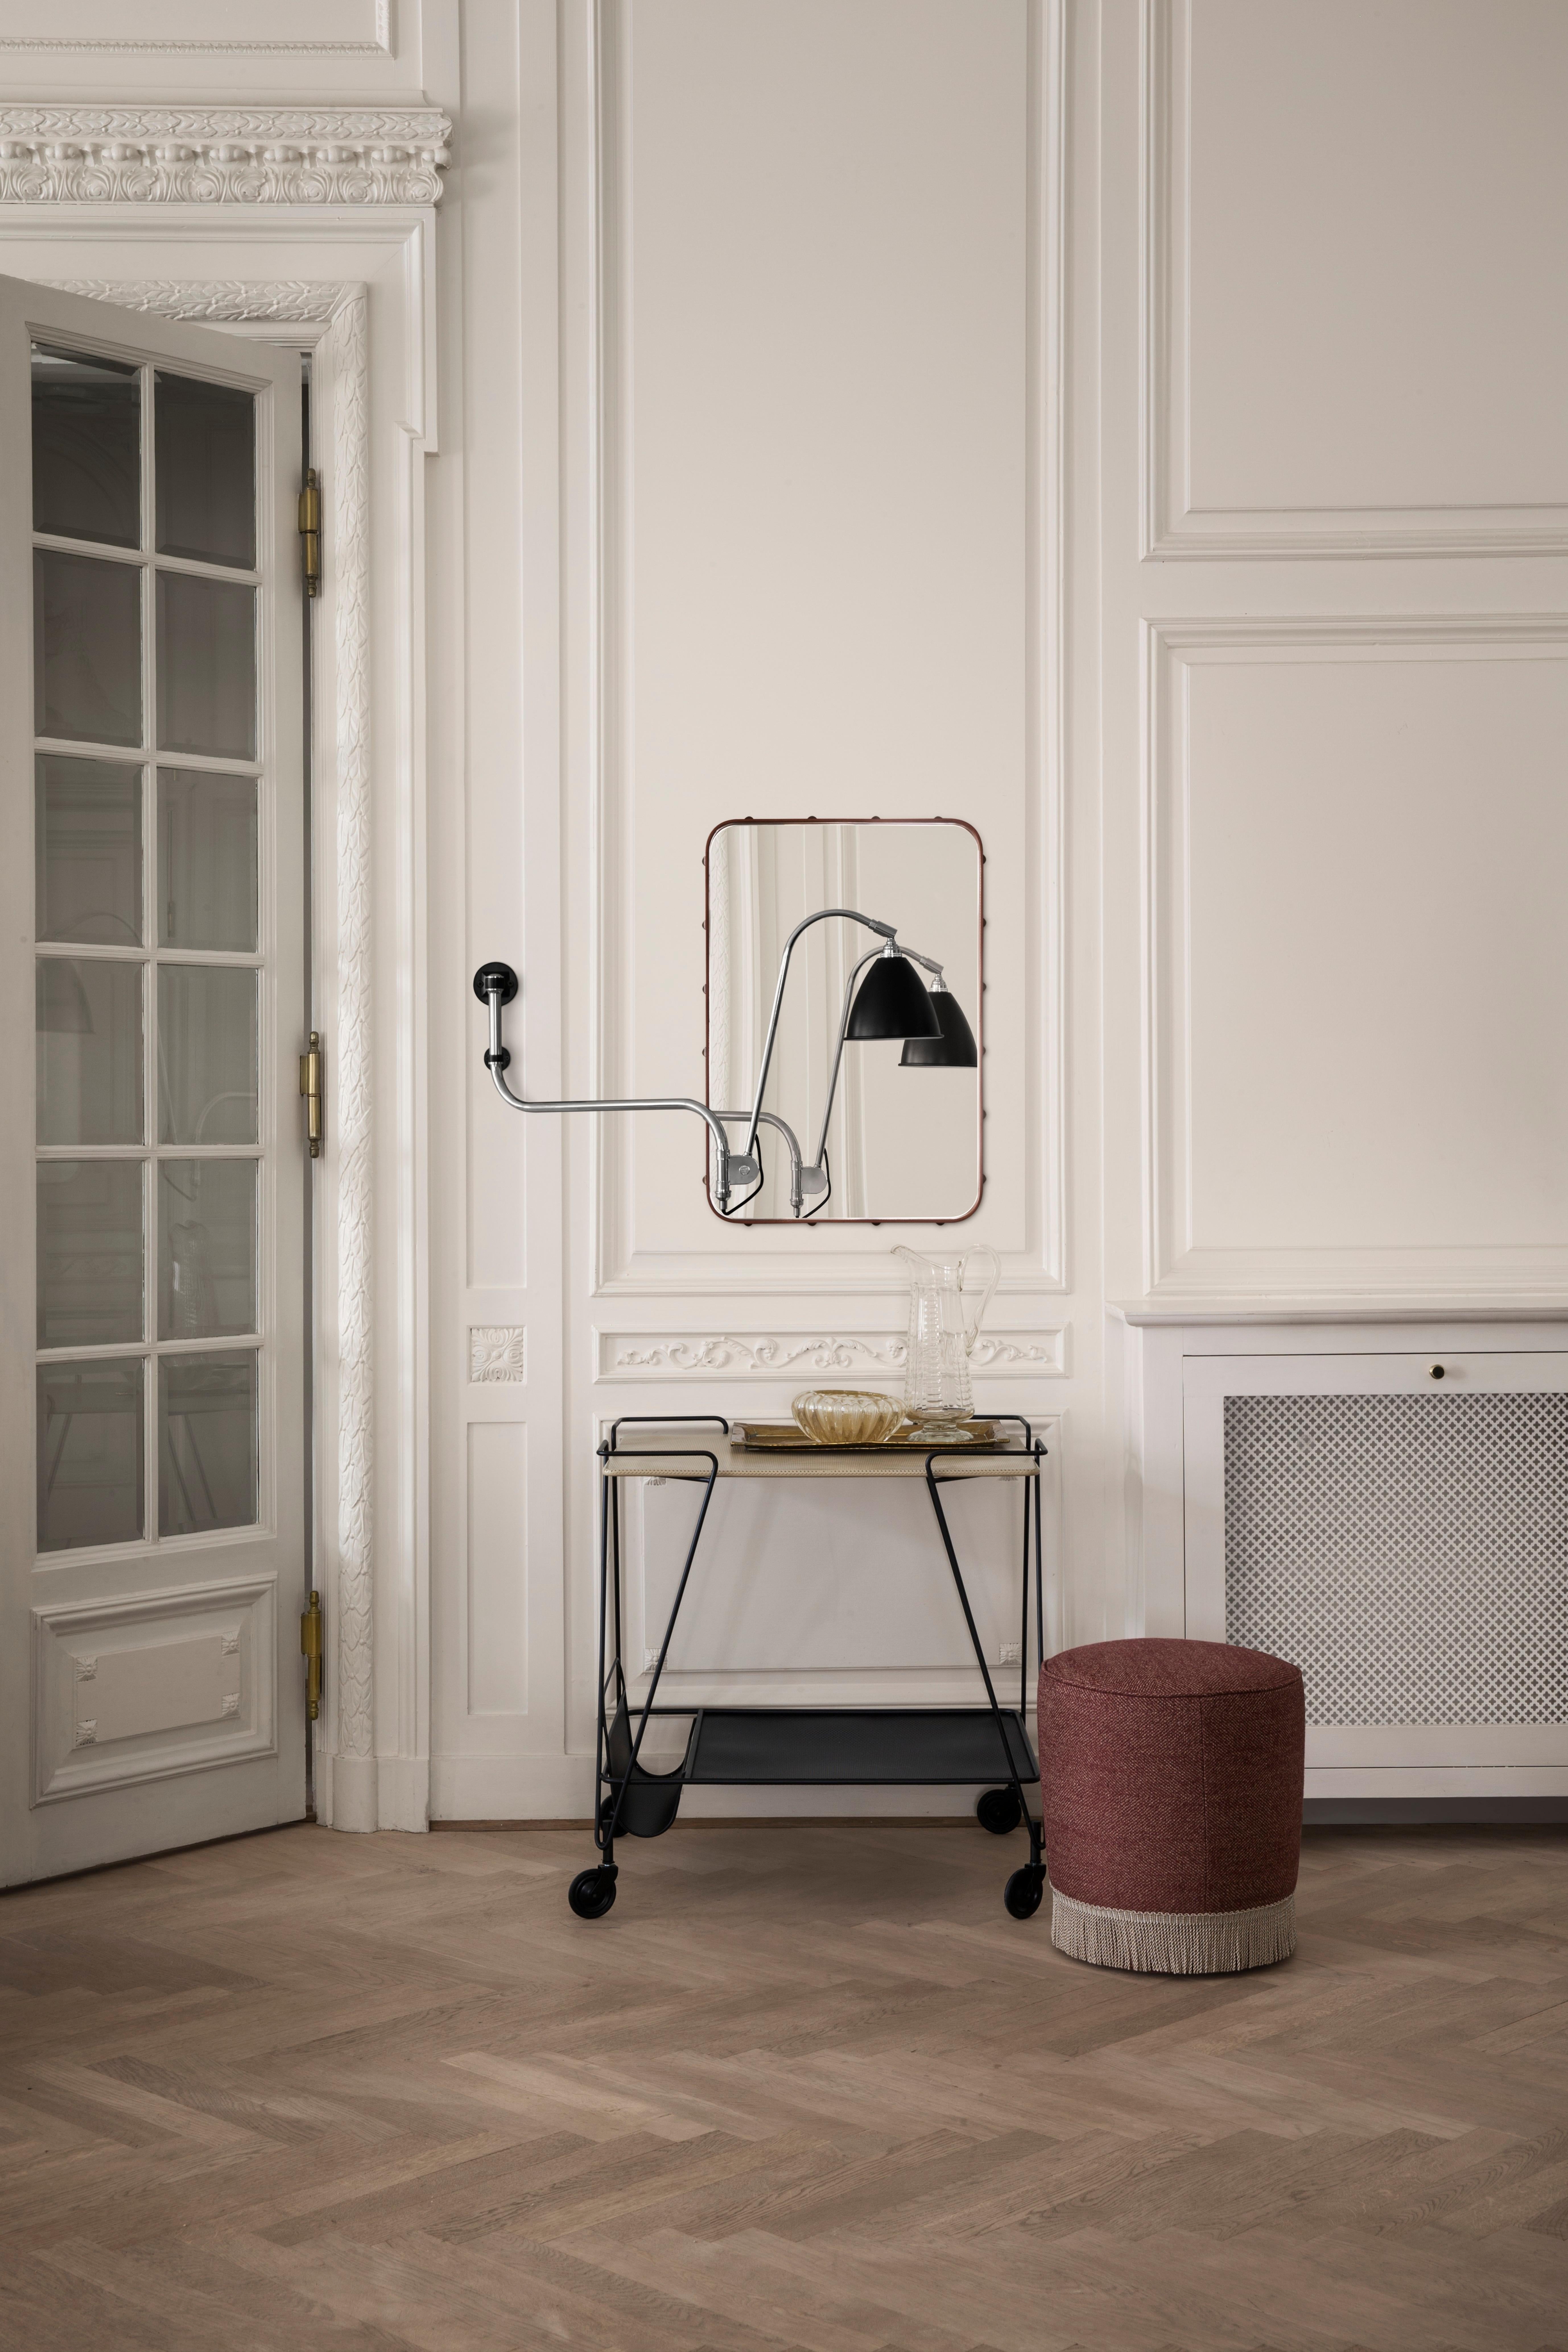 Small Jacques Adnet 'Rectangulaire' Wall Mirror in Black Leather for GUBI 3